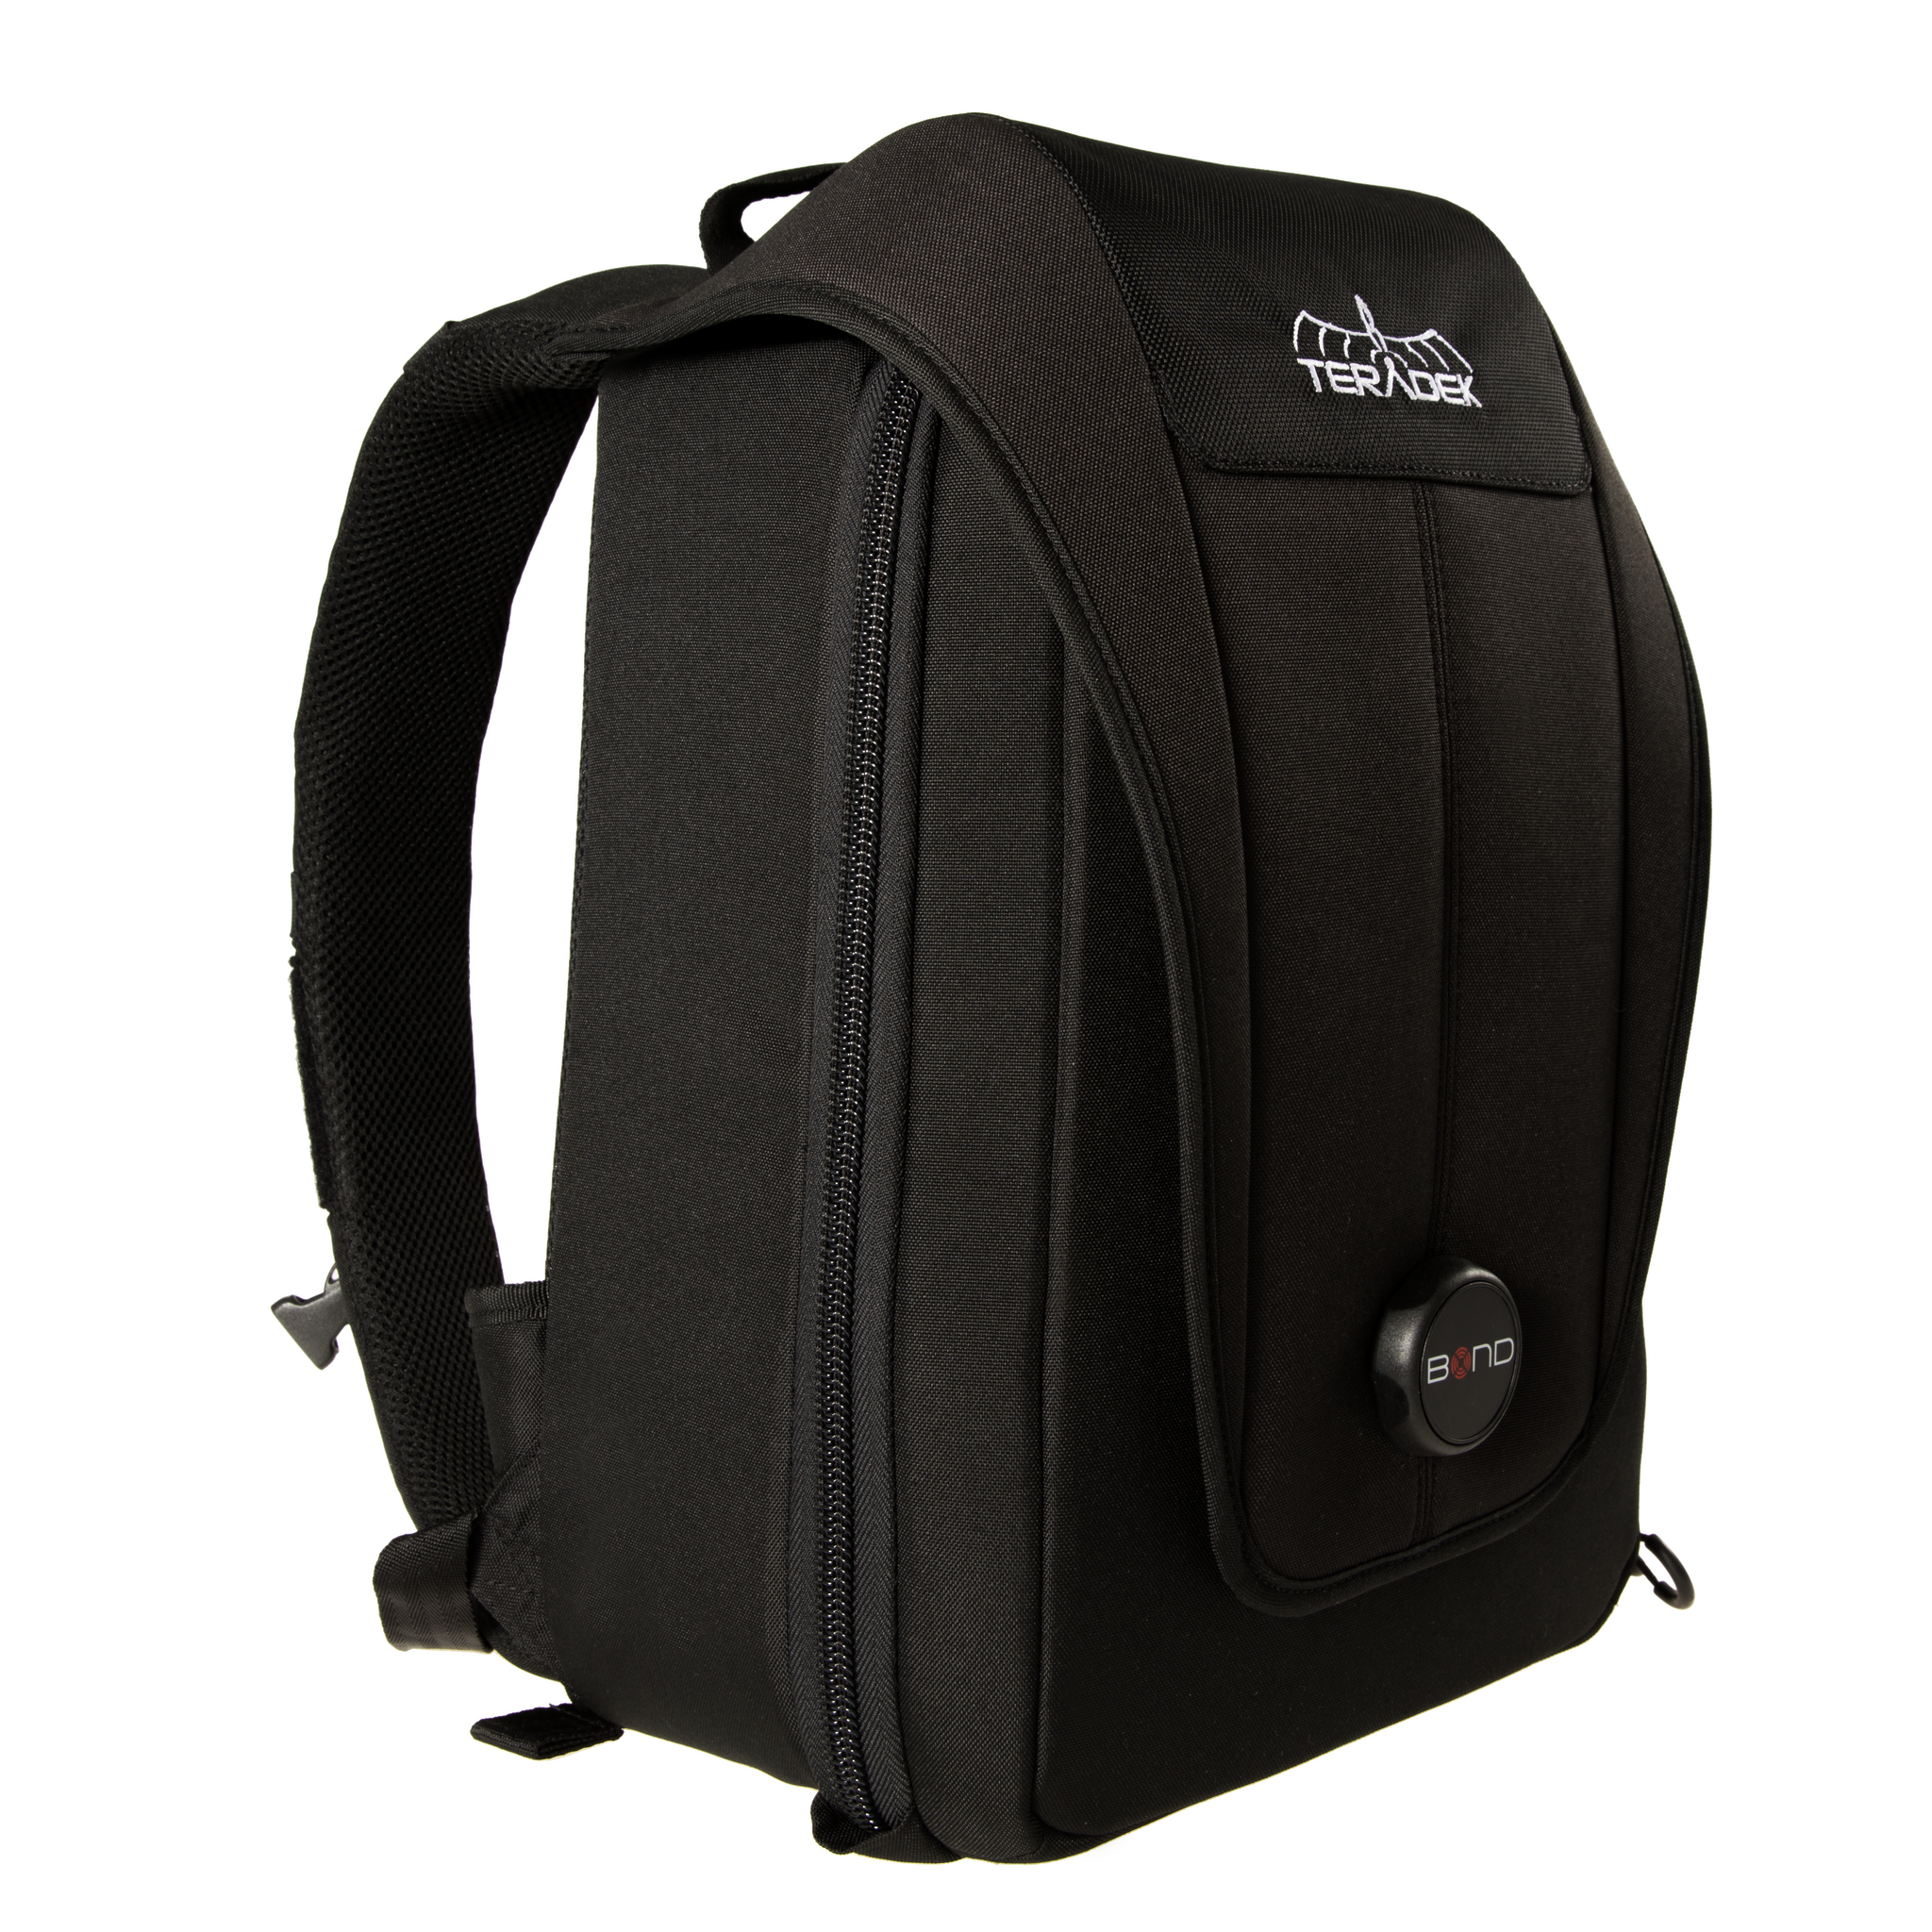 Pacific Backpack